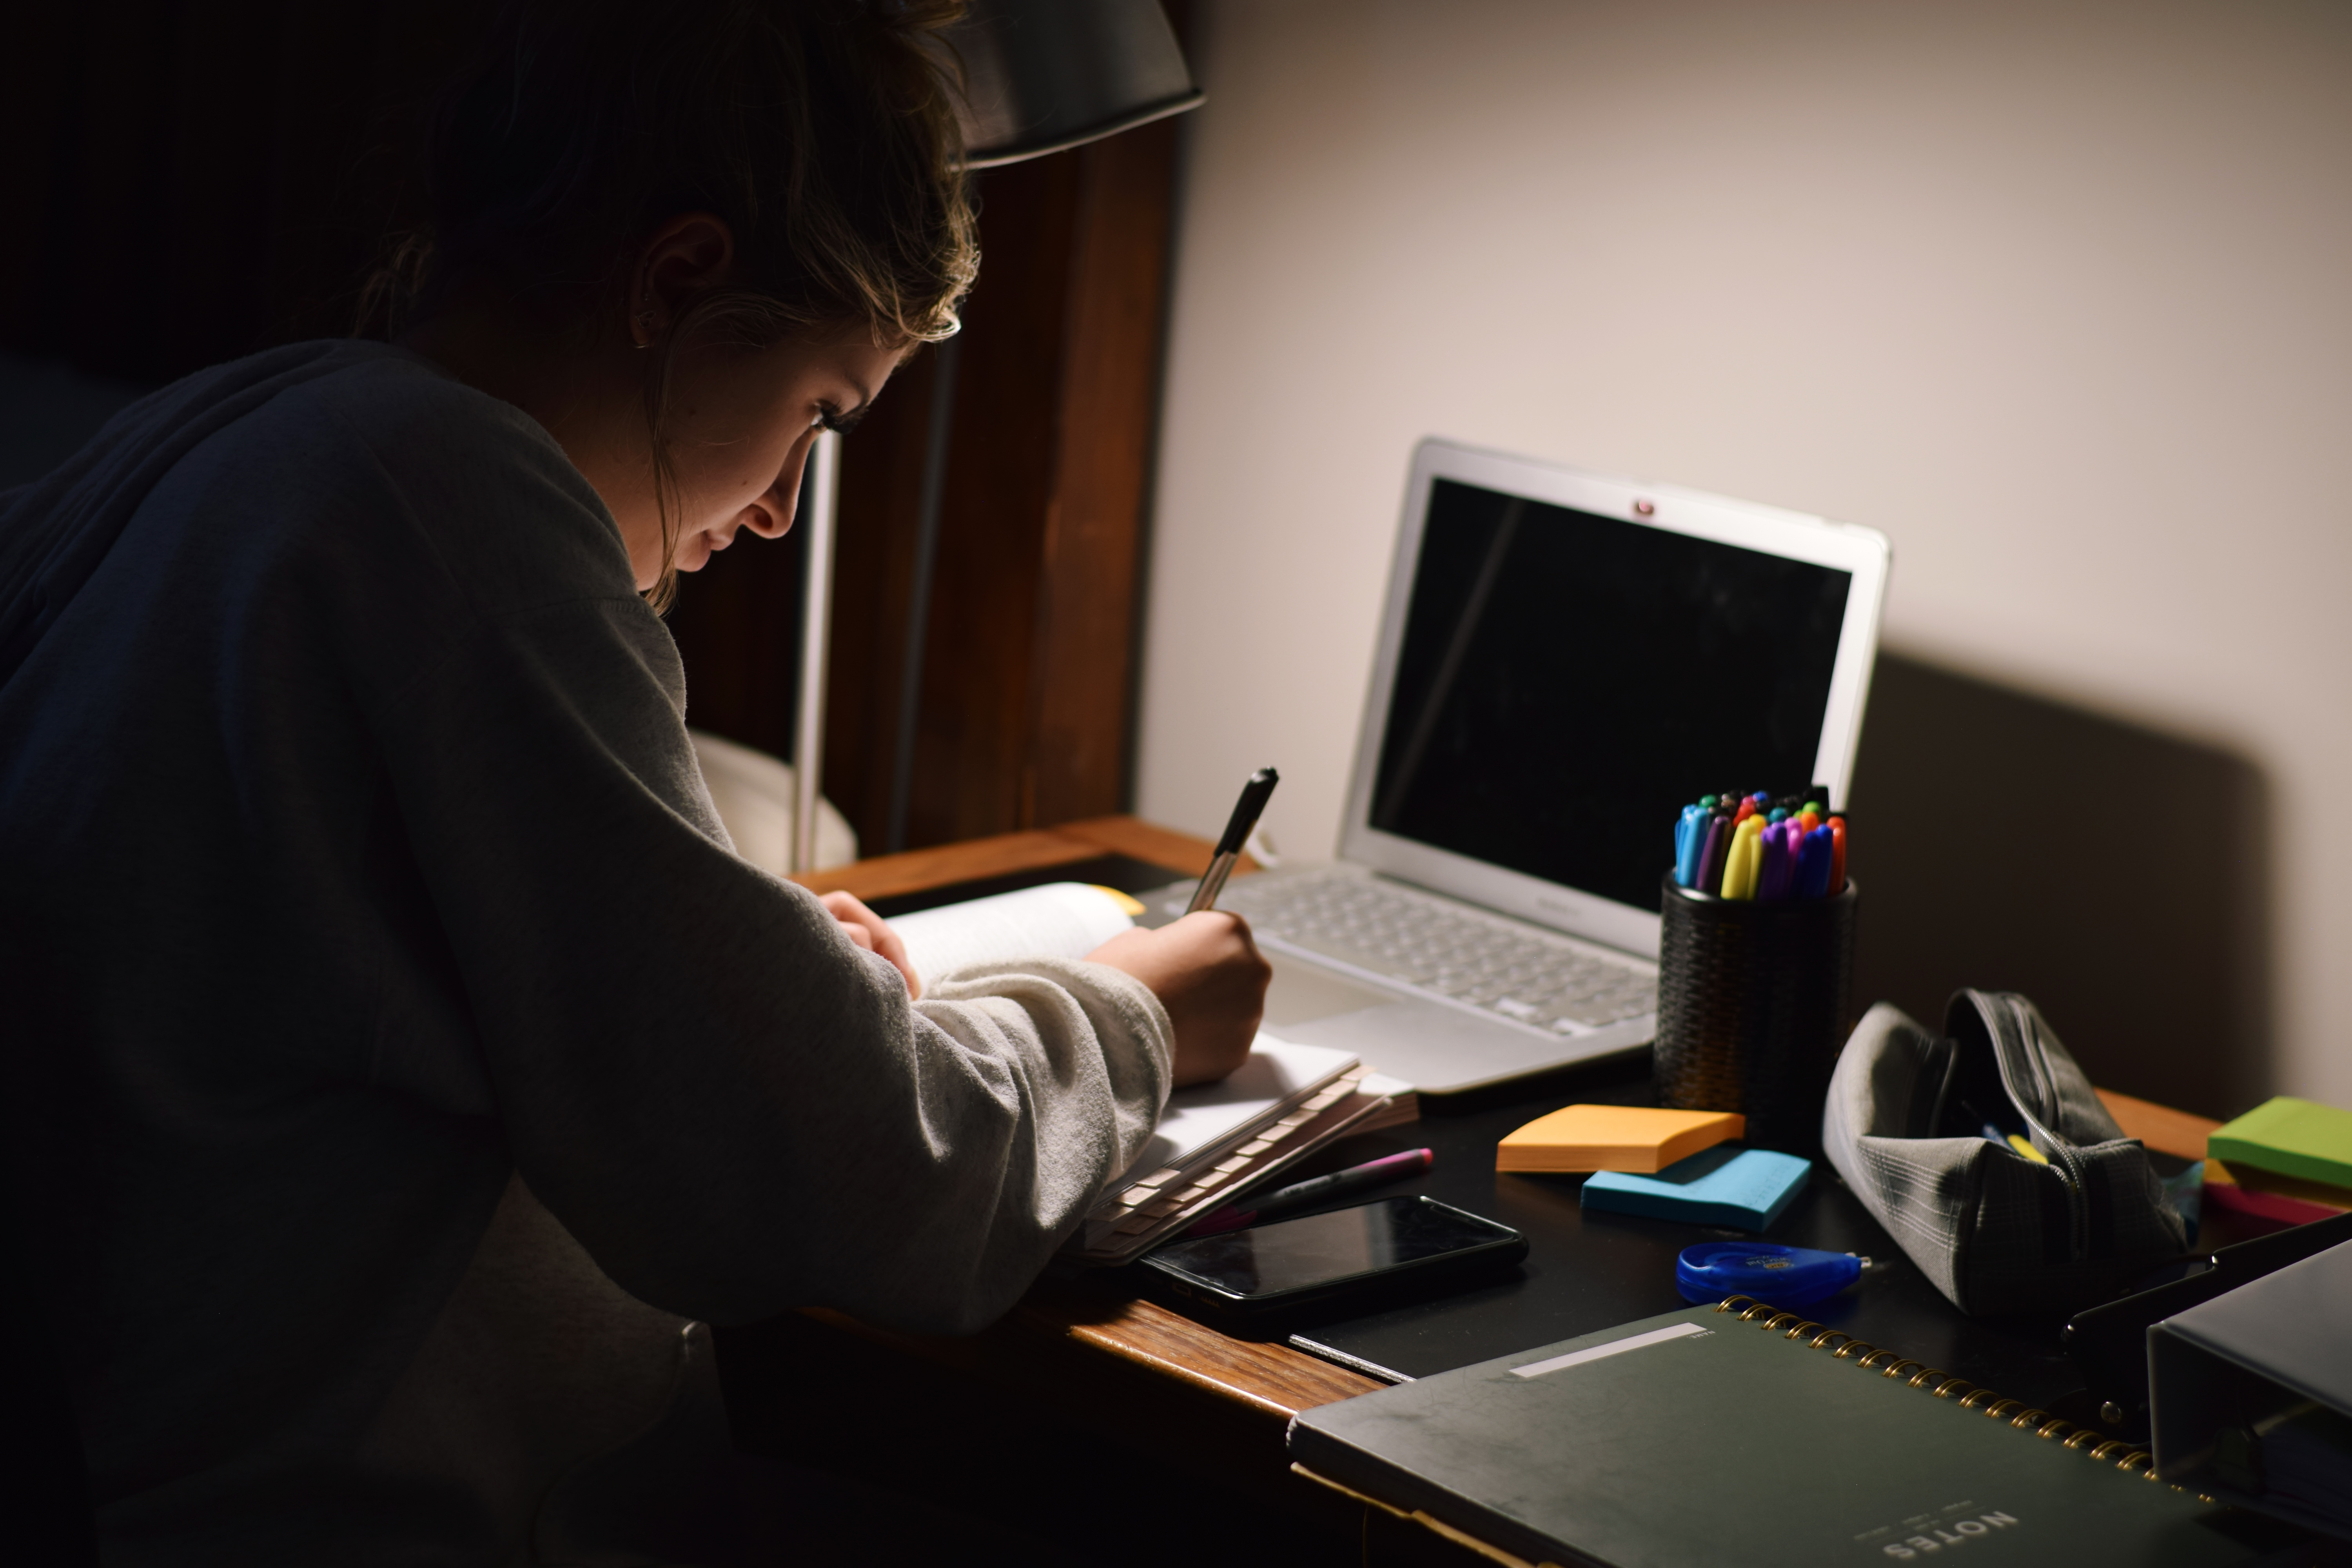 Young teenage girl student studying late at night in her room. | Source: Shutterstock